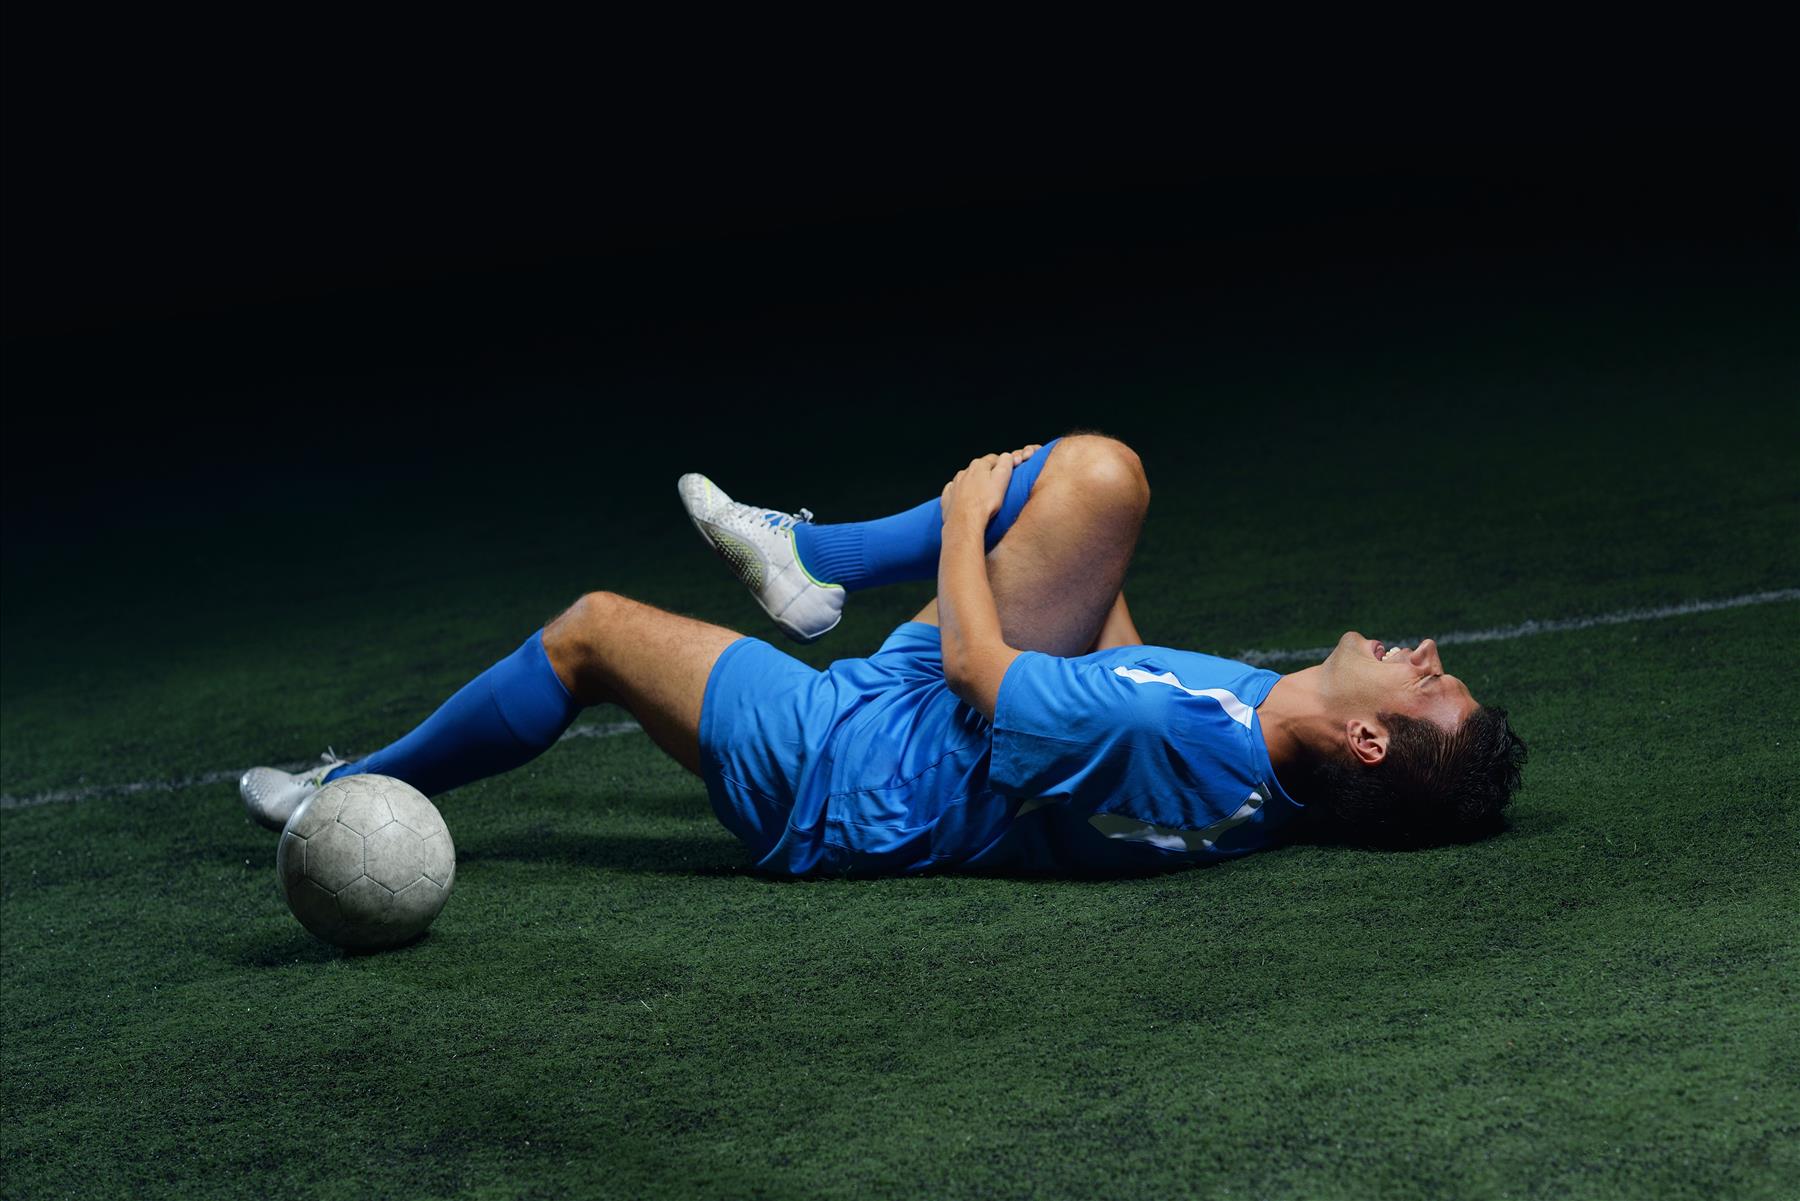 Surprising Stats about Sports Related Injury